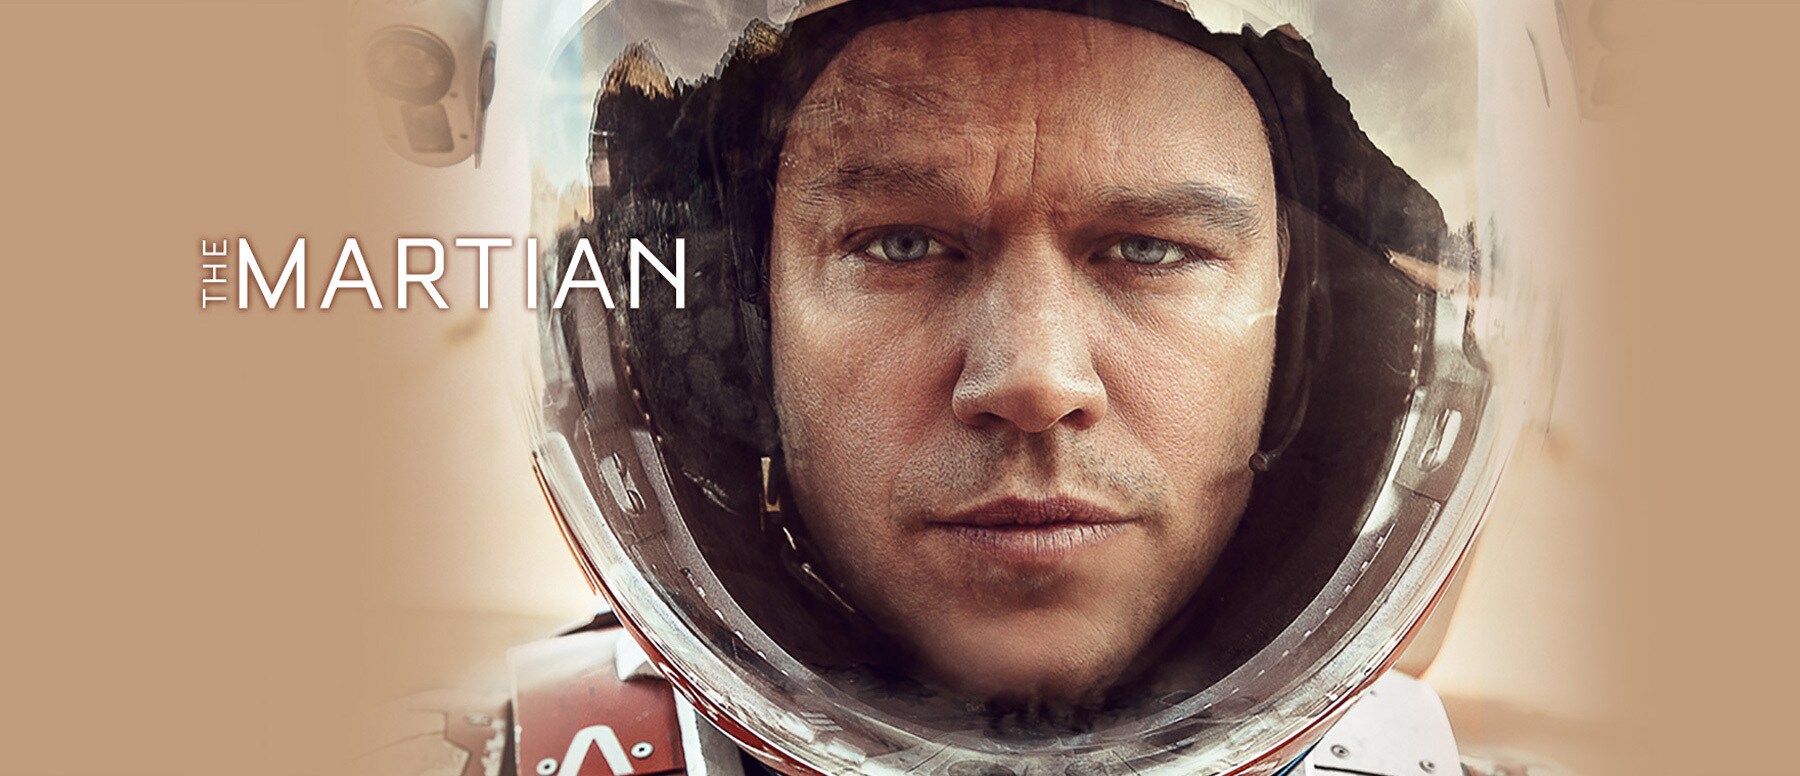 the martian full movie online dailymotion